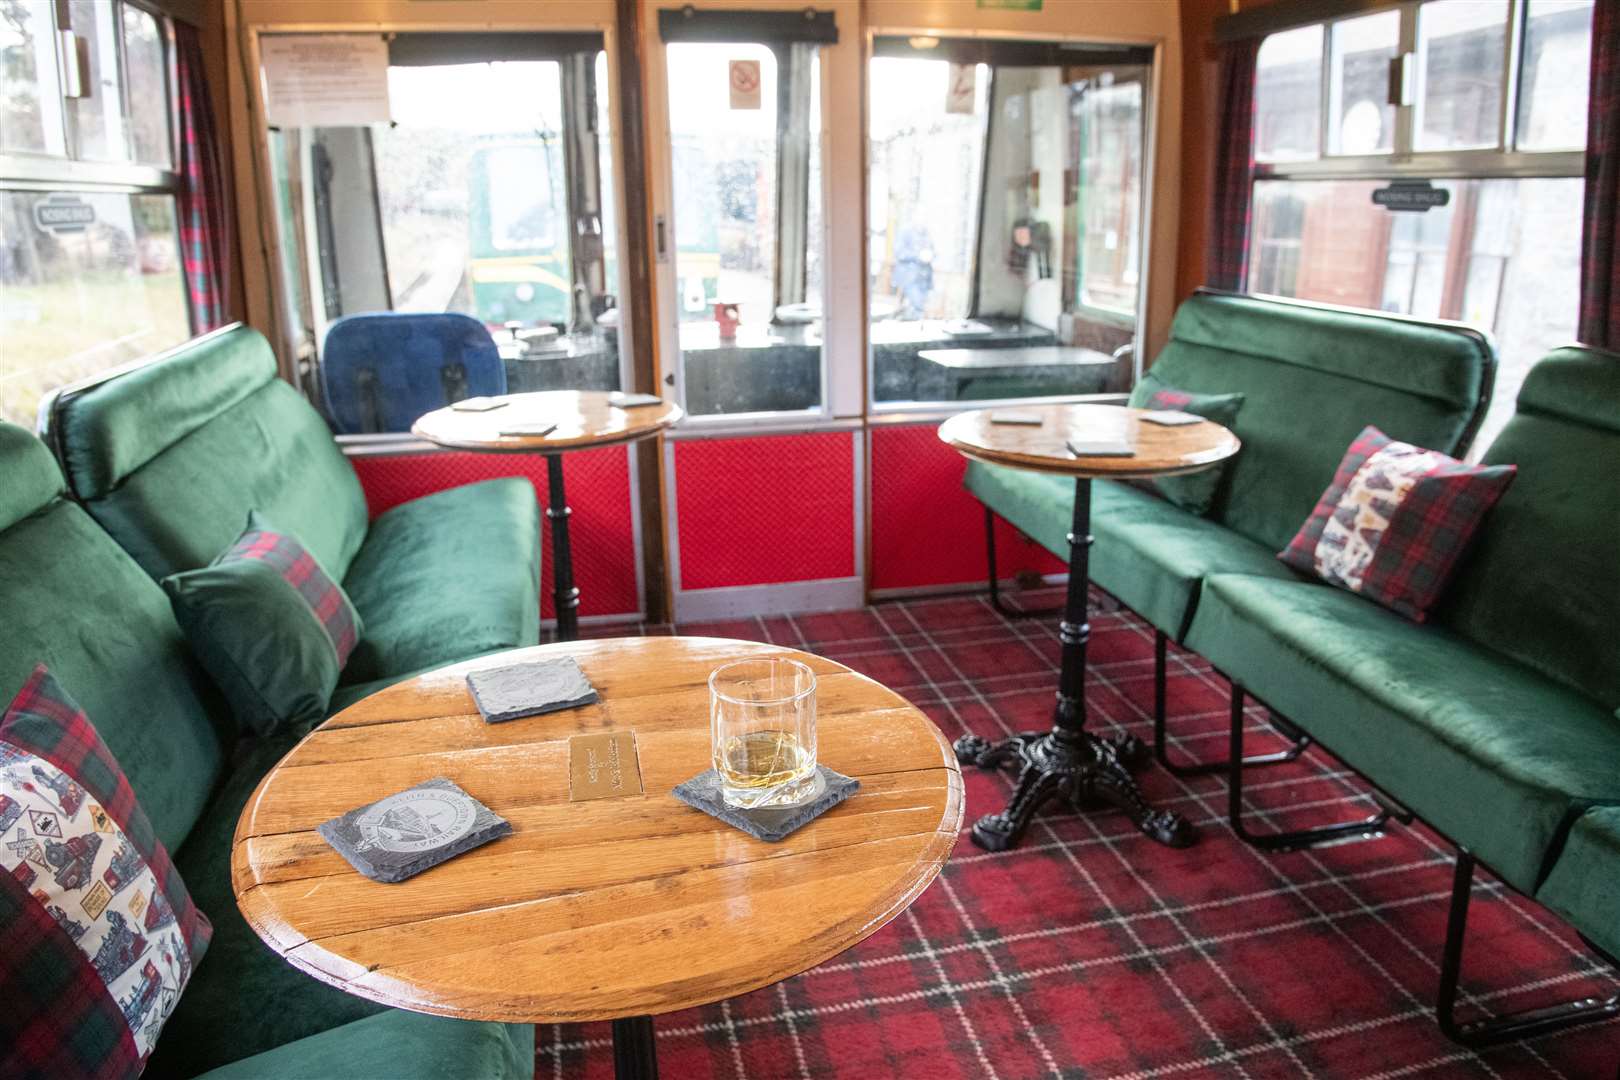 The interior stays true to the railway's history as the Whisky line, with tartan carpets and curtains and furniture made with Whisky casks from Speyside Cooperage. Picture: Daniel Forsyth